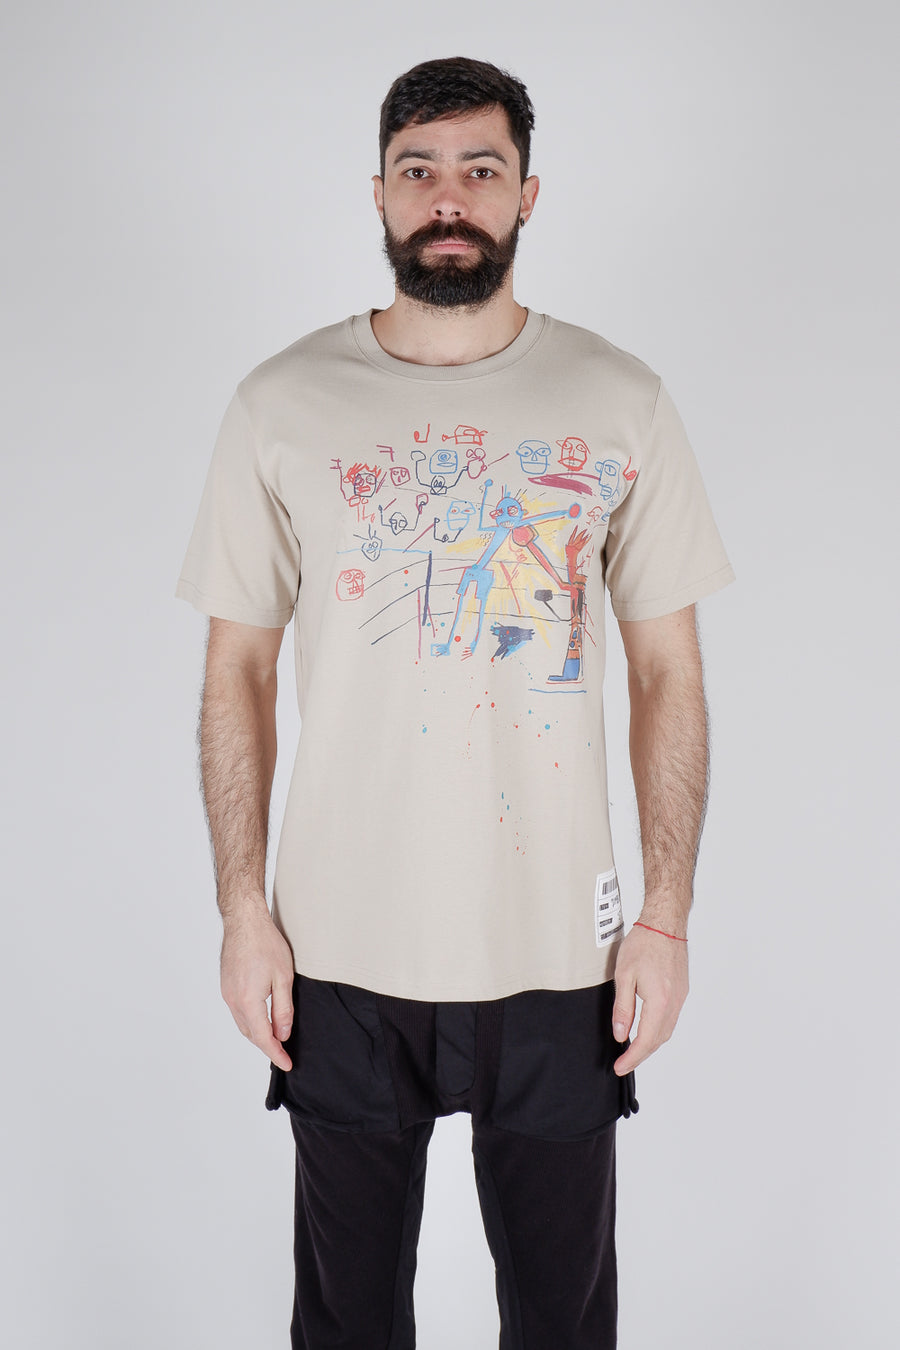 Buy the ABE Basquiat Uppercut T-Shirt Beige in Black at Intro. Spend £50 for free UK delivery. Official stockists. We ship worldwide.